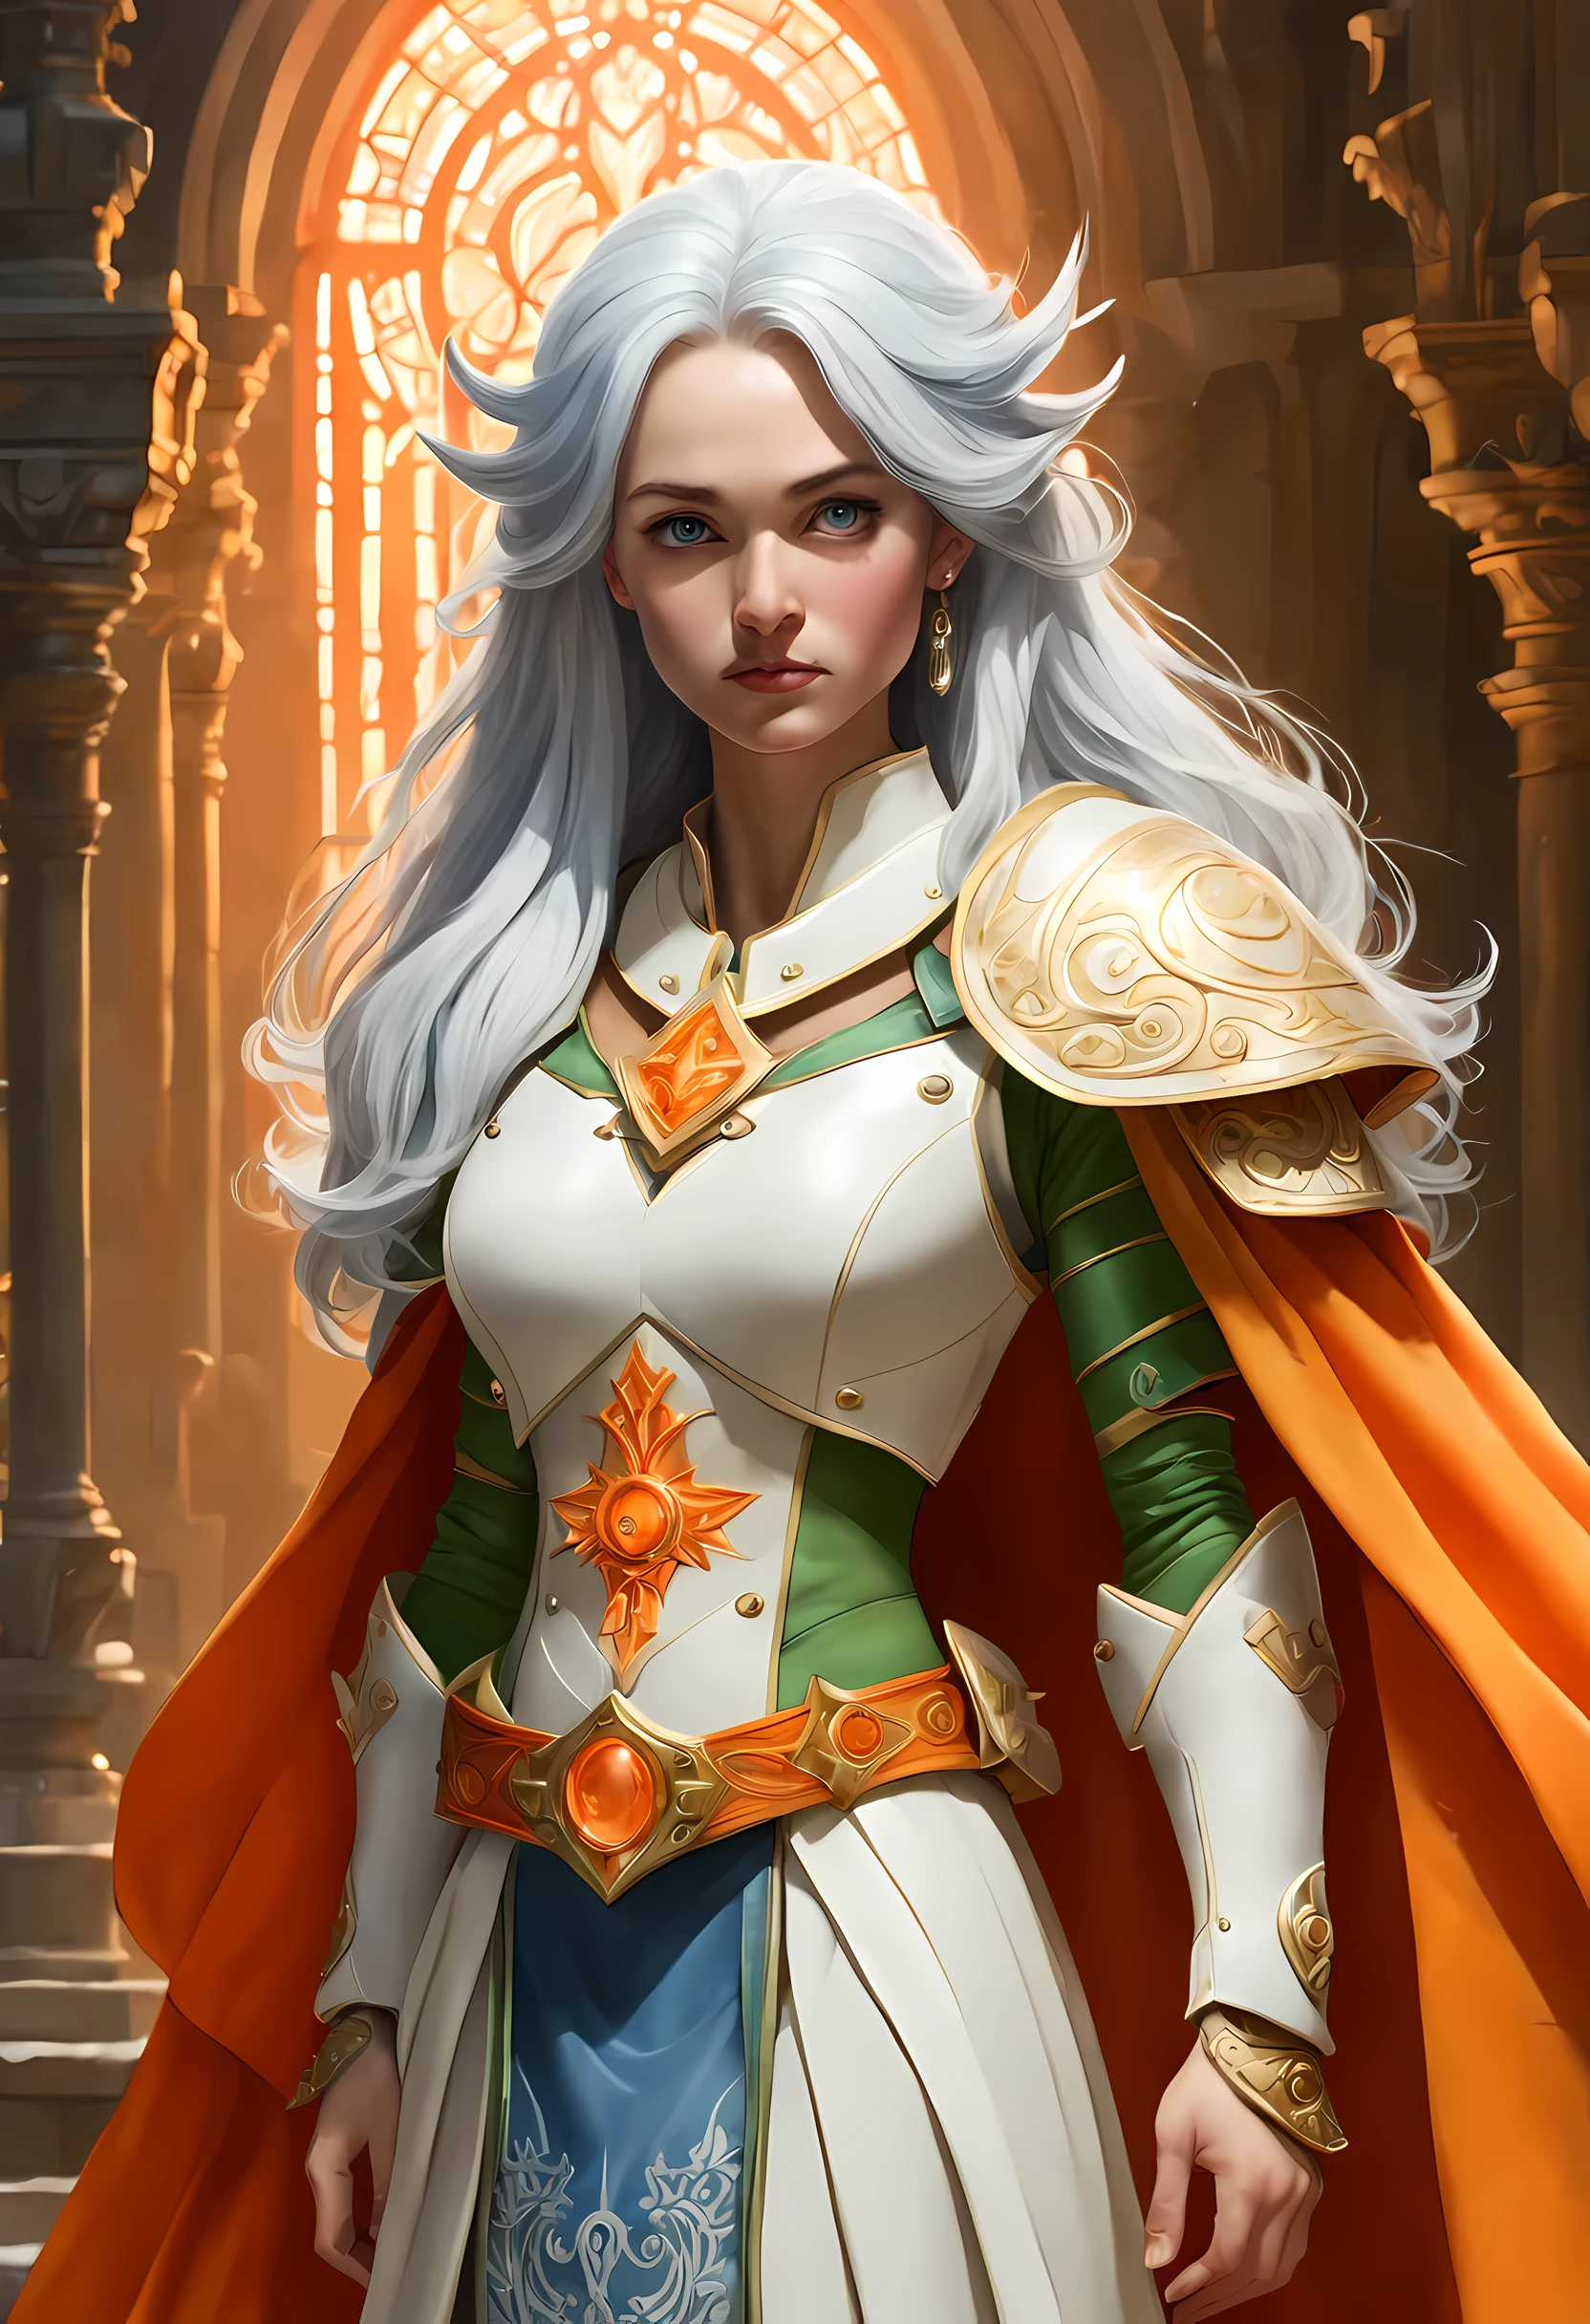 fantasy art, dnd art, RPG art, wide shot, (masterpiece: 1.4) a (portrait: 1.3) intense details, highly detailed, photorealistic, best quality, highres, portrait a female (fantasy art, Masterpiece, best quality: 1.3) bl3uprint (blue skin: 1.5, intense details facial details, exquisite beauty, (fantasy art, Masterpiece, best quality) cleric, (blue: 1.3) skinned female, (white hair: 1.3), long hair, intense (green: 1.3) eye, fantasy art, Masterpiece, best quality) armed a fiery sword red fire, wearing heavy (white: 1.3) half plate mail armor, wearing high heeled laced boots, wearing an(orange :1.3) cloak, wearing glowing holy symbol GlowingRunes_yellow, within fantasy temple background, reflection light, high details, best quality, 16k, [ultra detailed], masterpiece, best quality, (extremely detailed), close up, ultra wide shot, photorealistic, RAW, fantasy art, dnd art, fantasy art, realistic art,((best quality)), ((masterpiece)), (detailed), perfect face, ((no ears: 1.6))